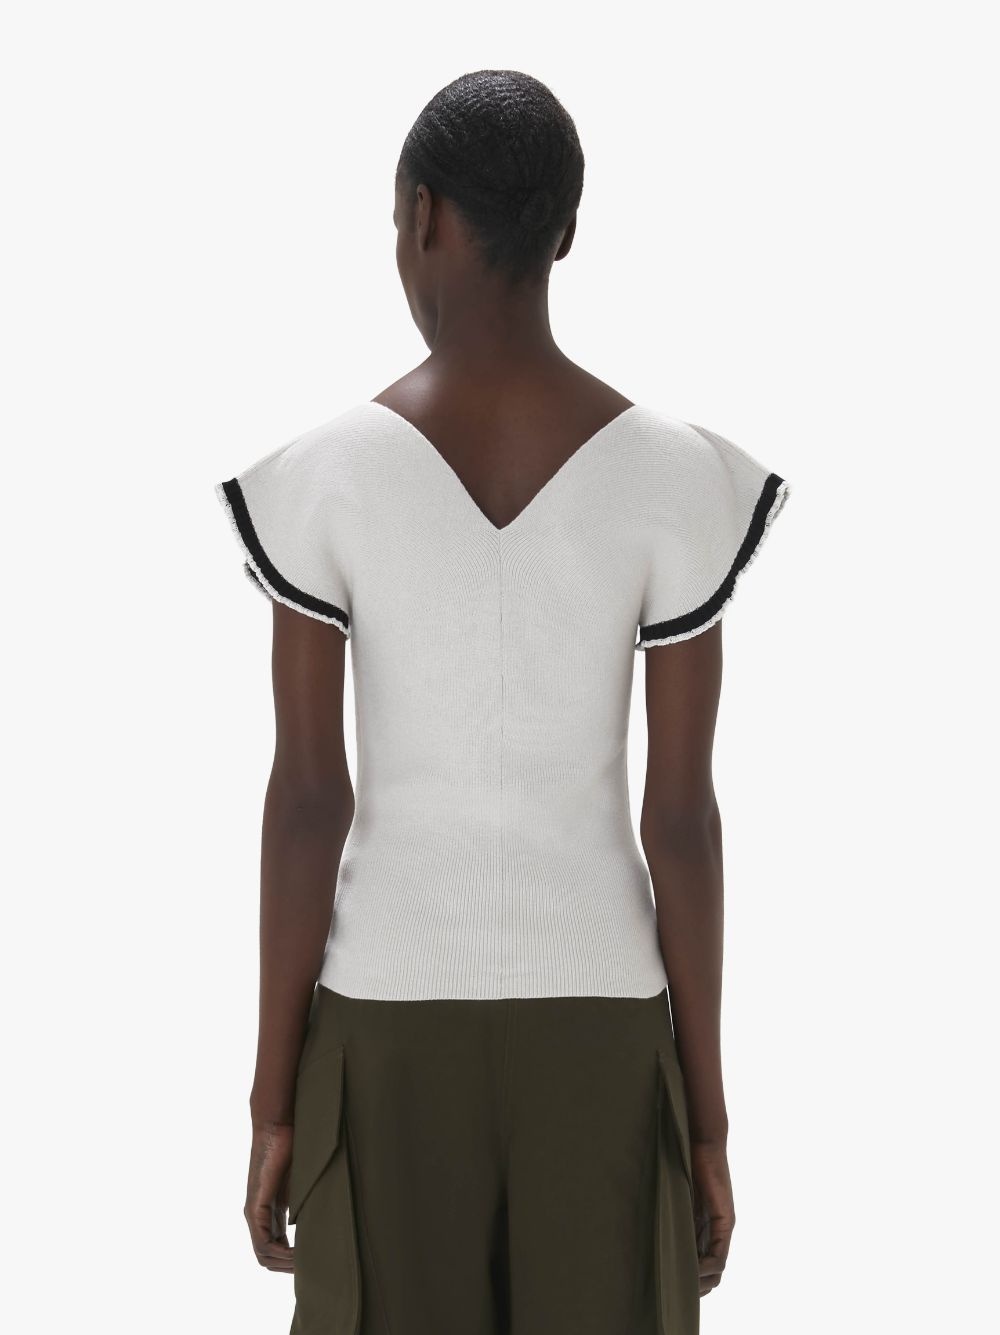 SHORT SLEEVE TOP WITH FRILL CUFF - 3